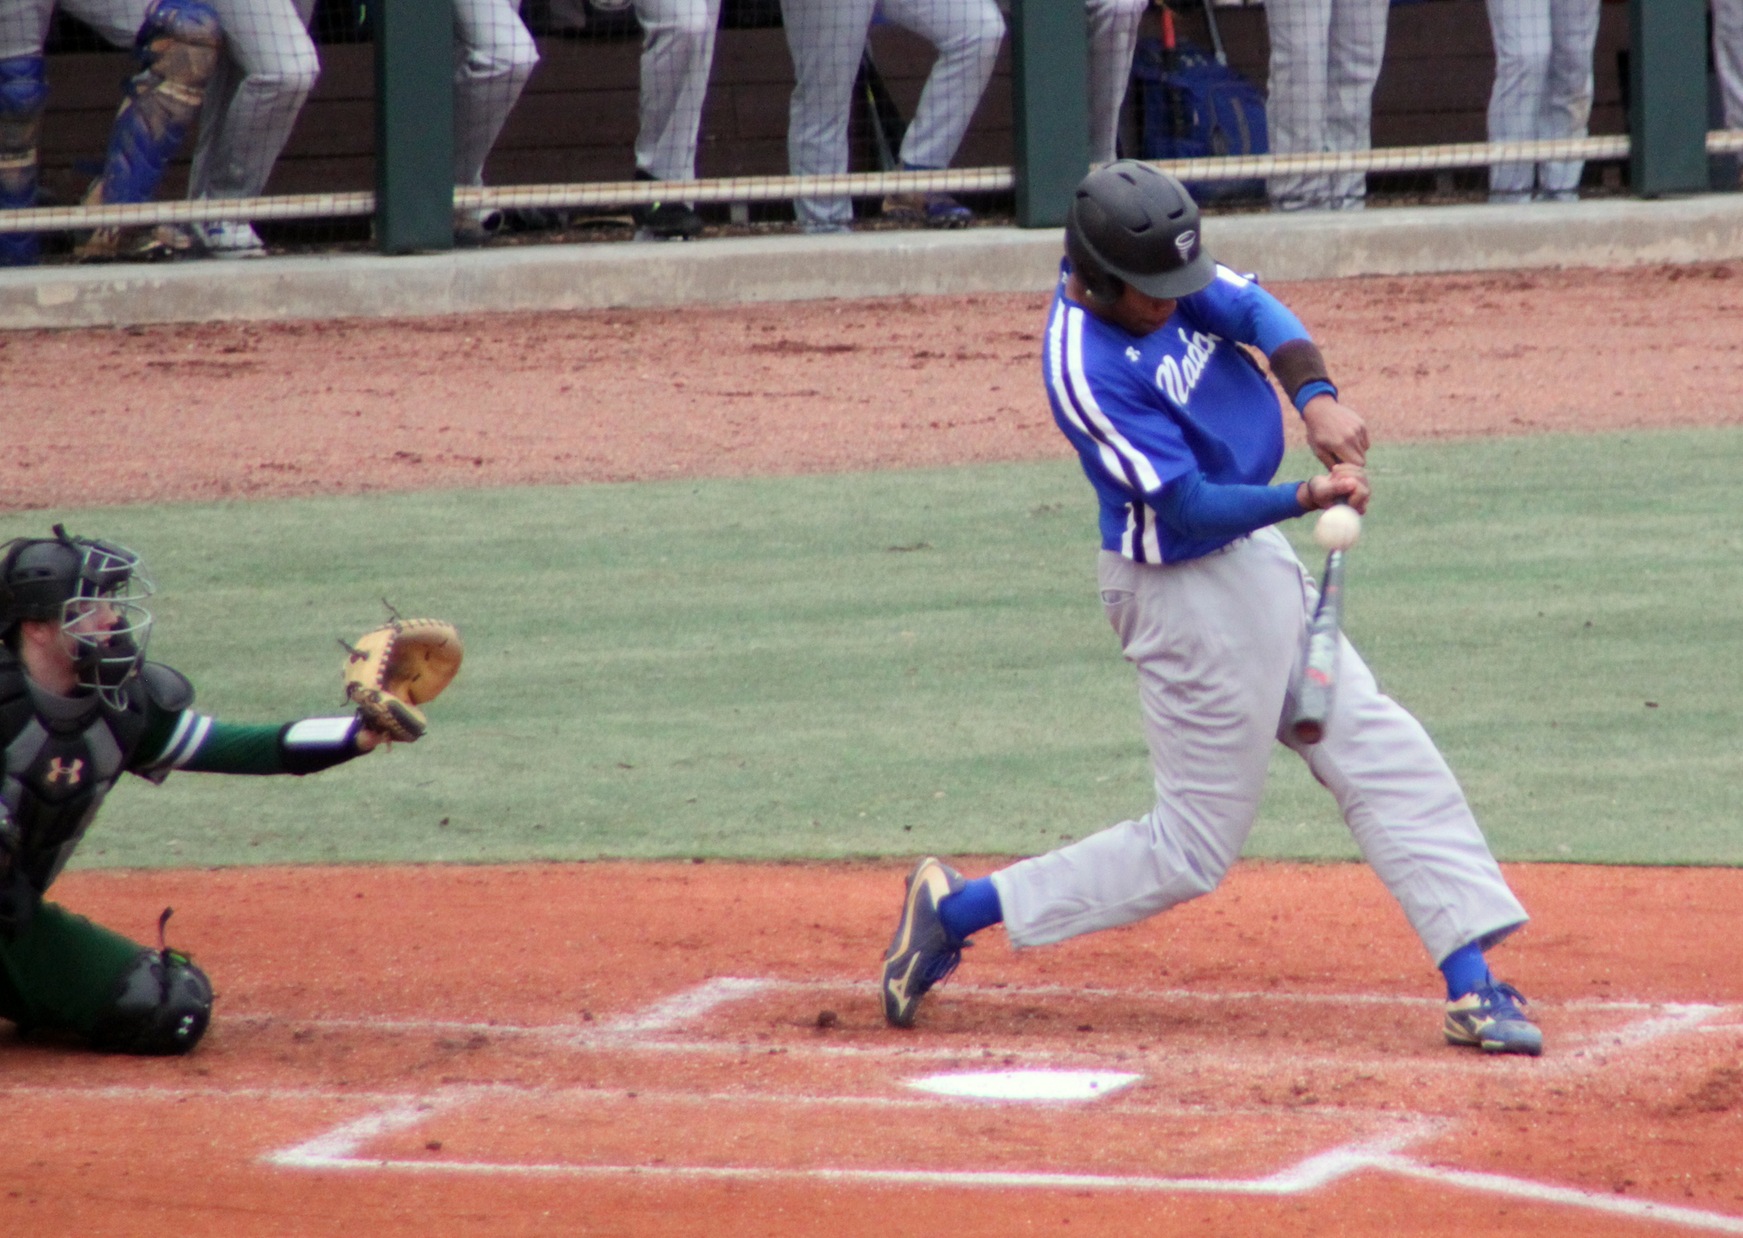 JJ Wilkes drove in a run on an RBI double on Sunday at Gil Coan Field (Photo courtesy of Judy Victory).